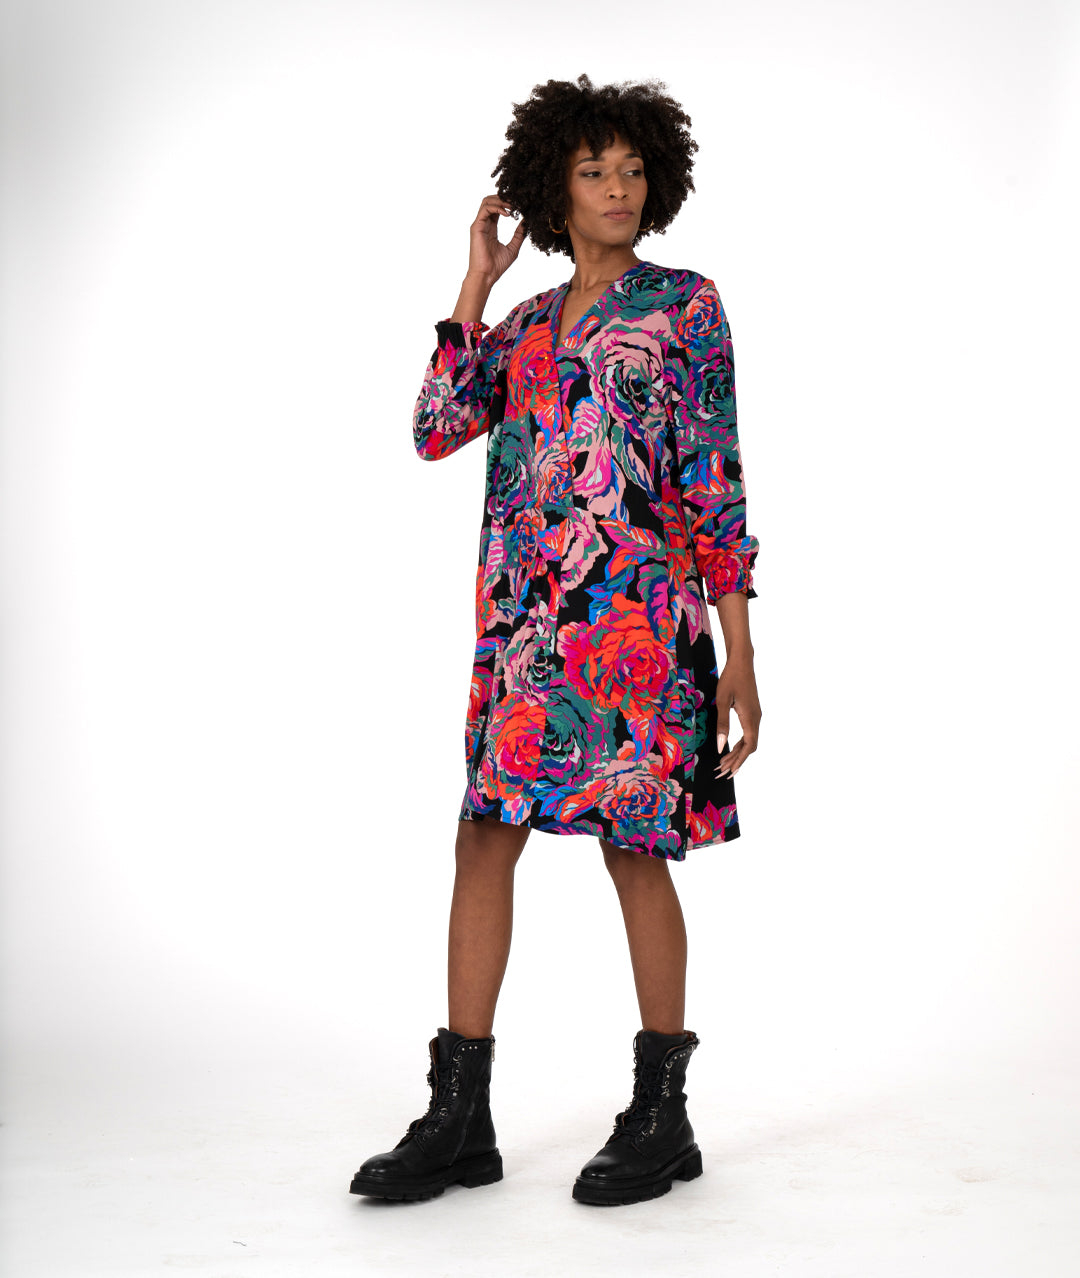 model in a floral print A-line shape dress has a plunging v-neck, gathers at the waist, elastic in the cuffs